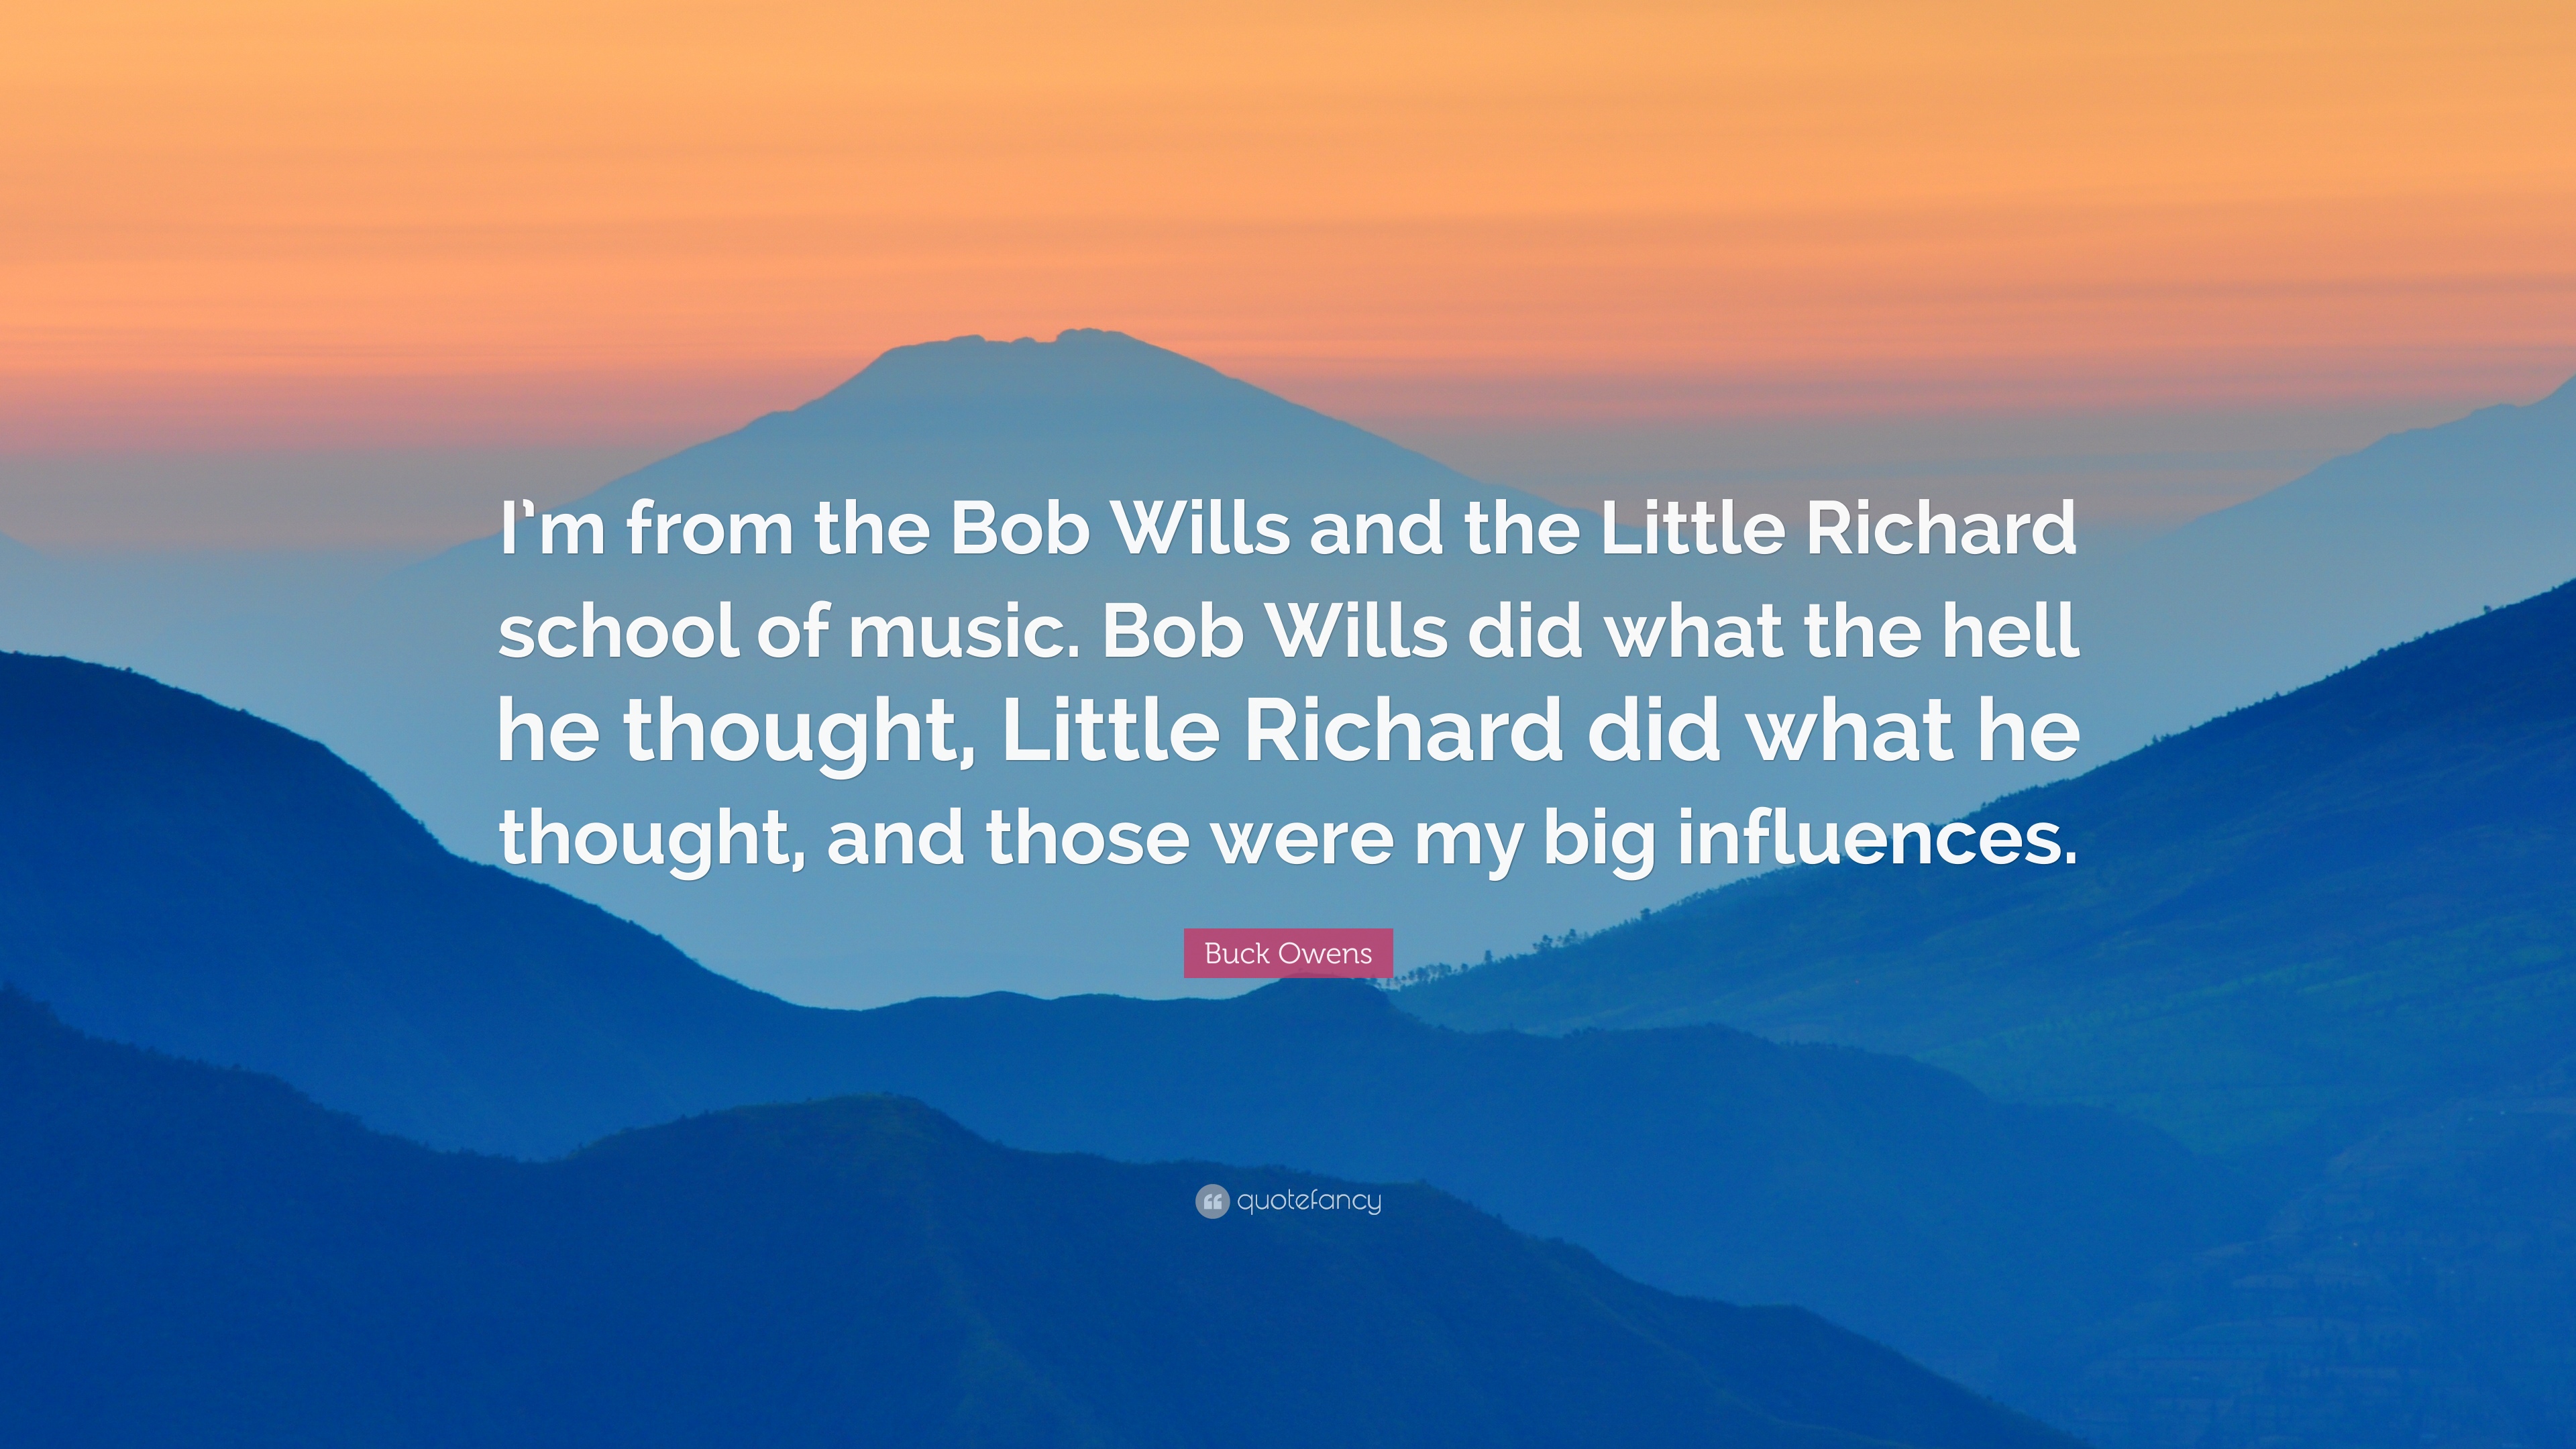 7 Quotes About Little Richard